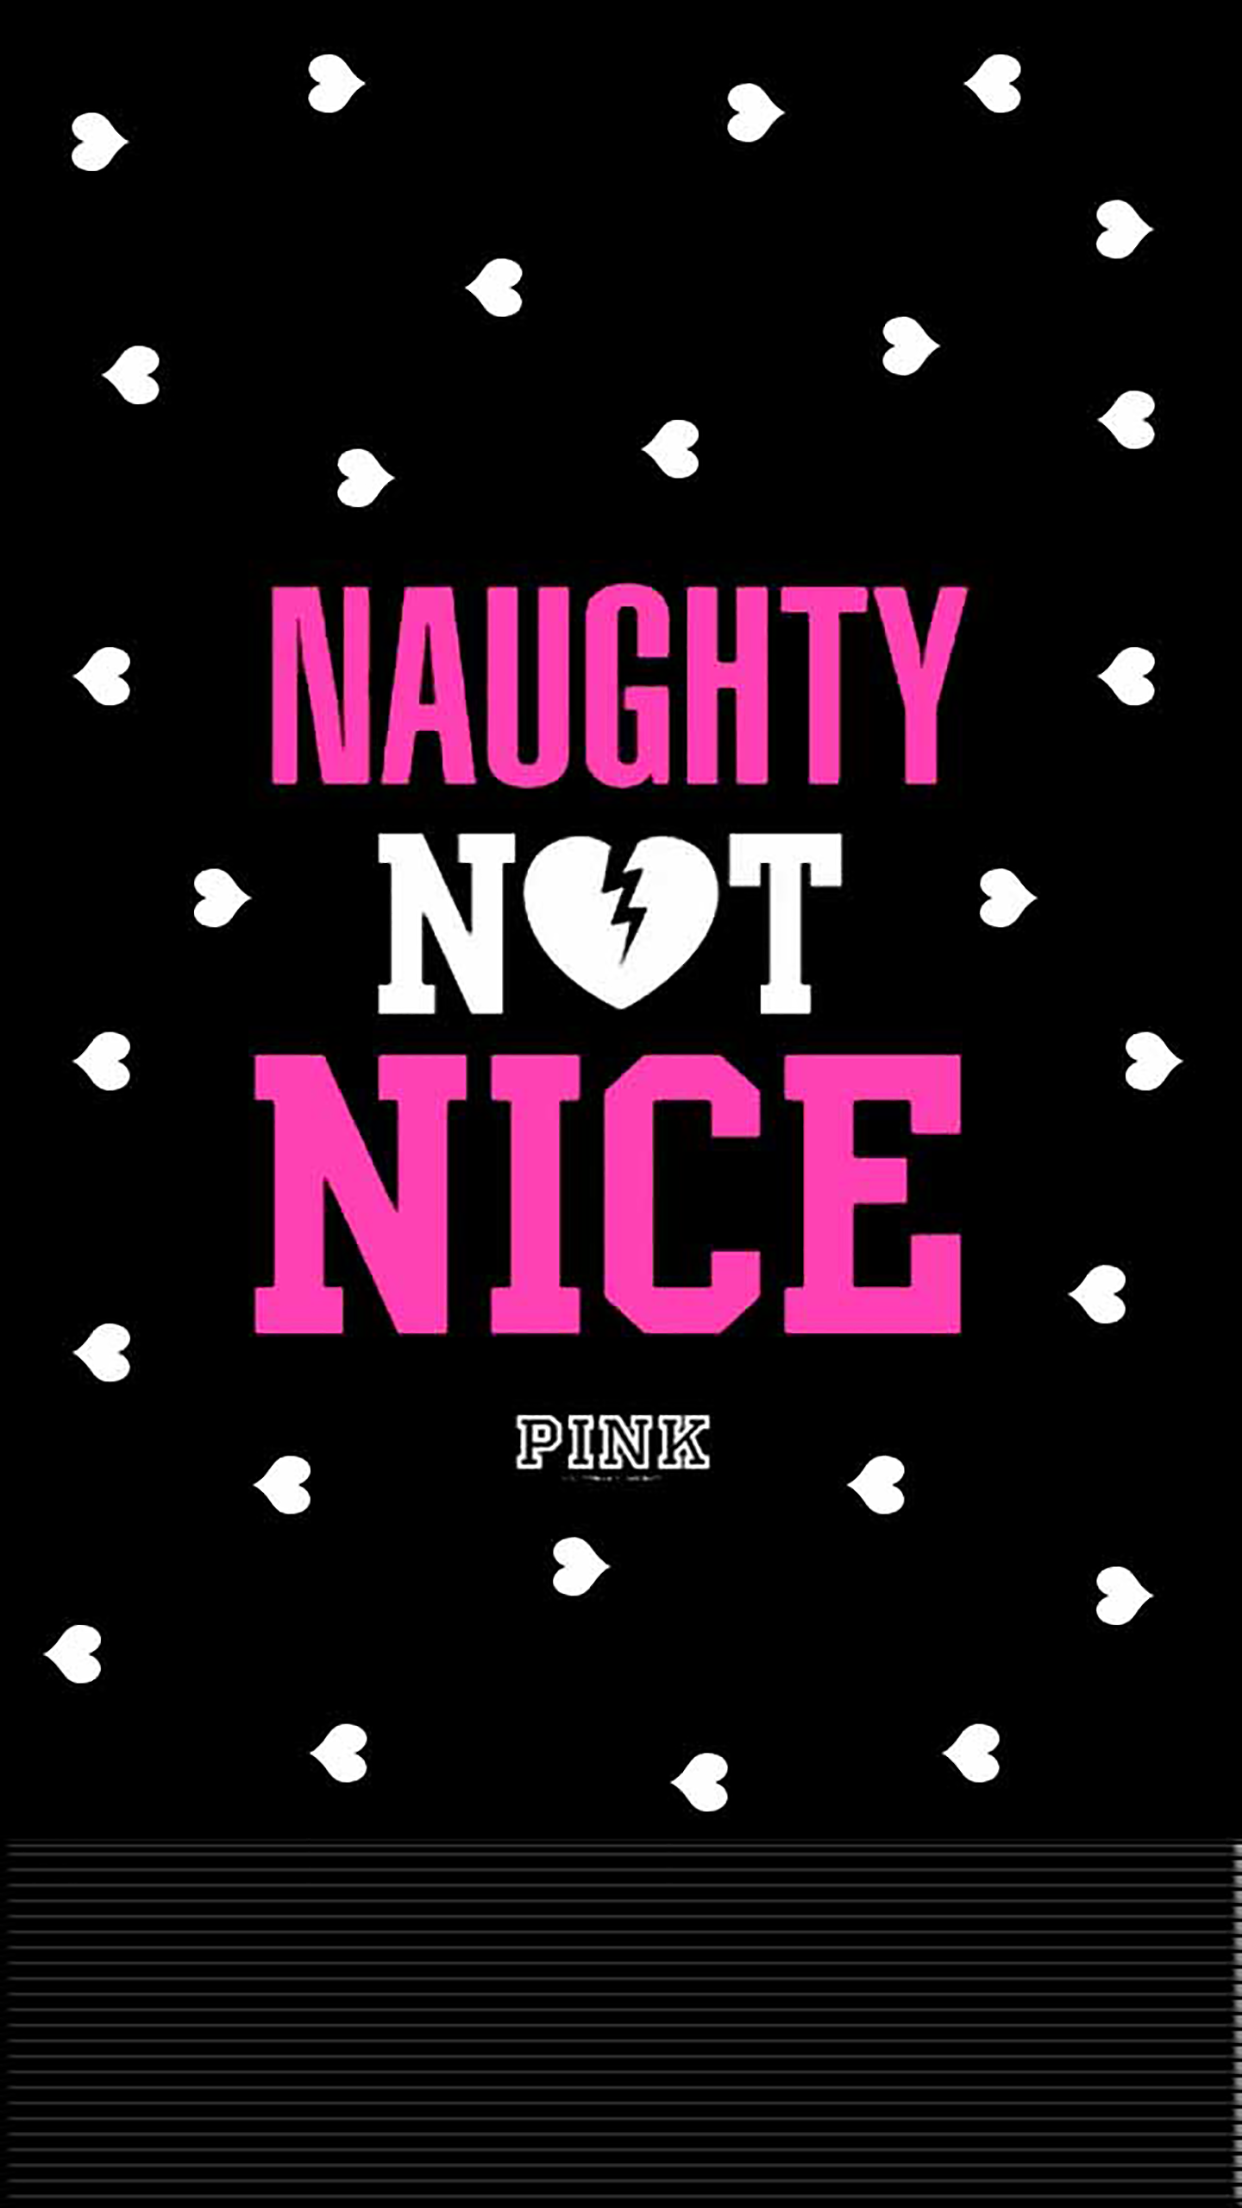 « Naughty Not Nice » lockscreen for iPhone 6Plus (portrait) (from